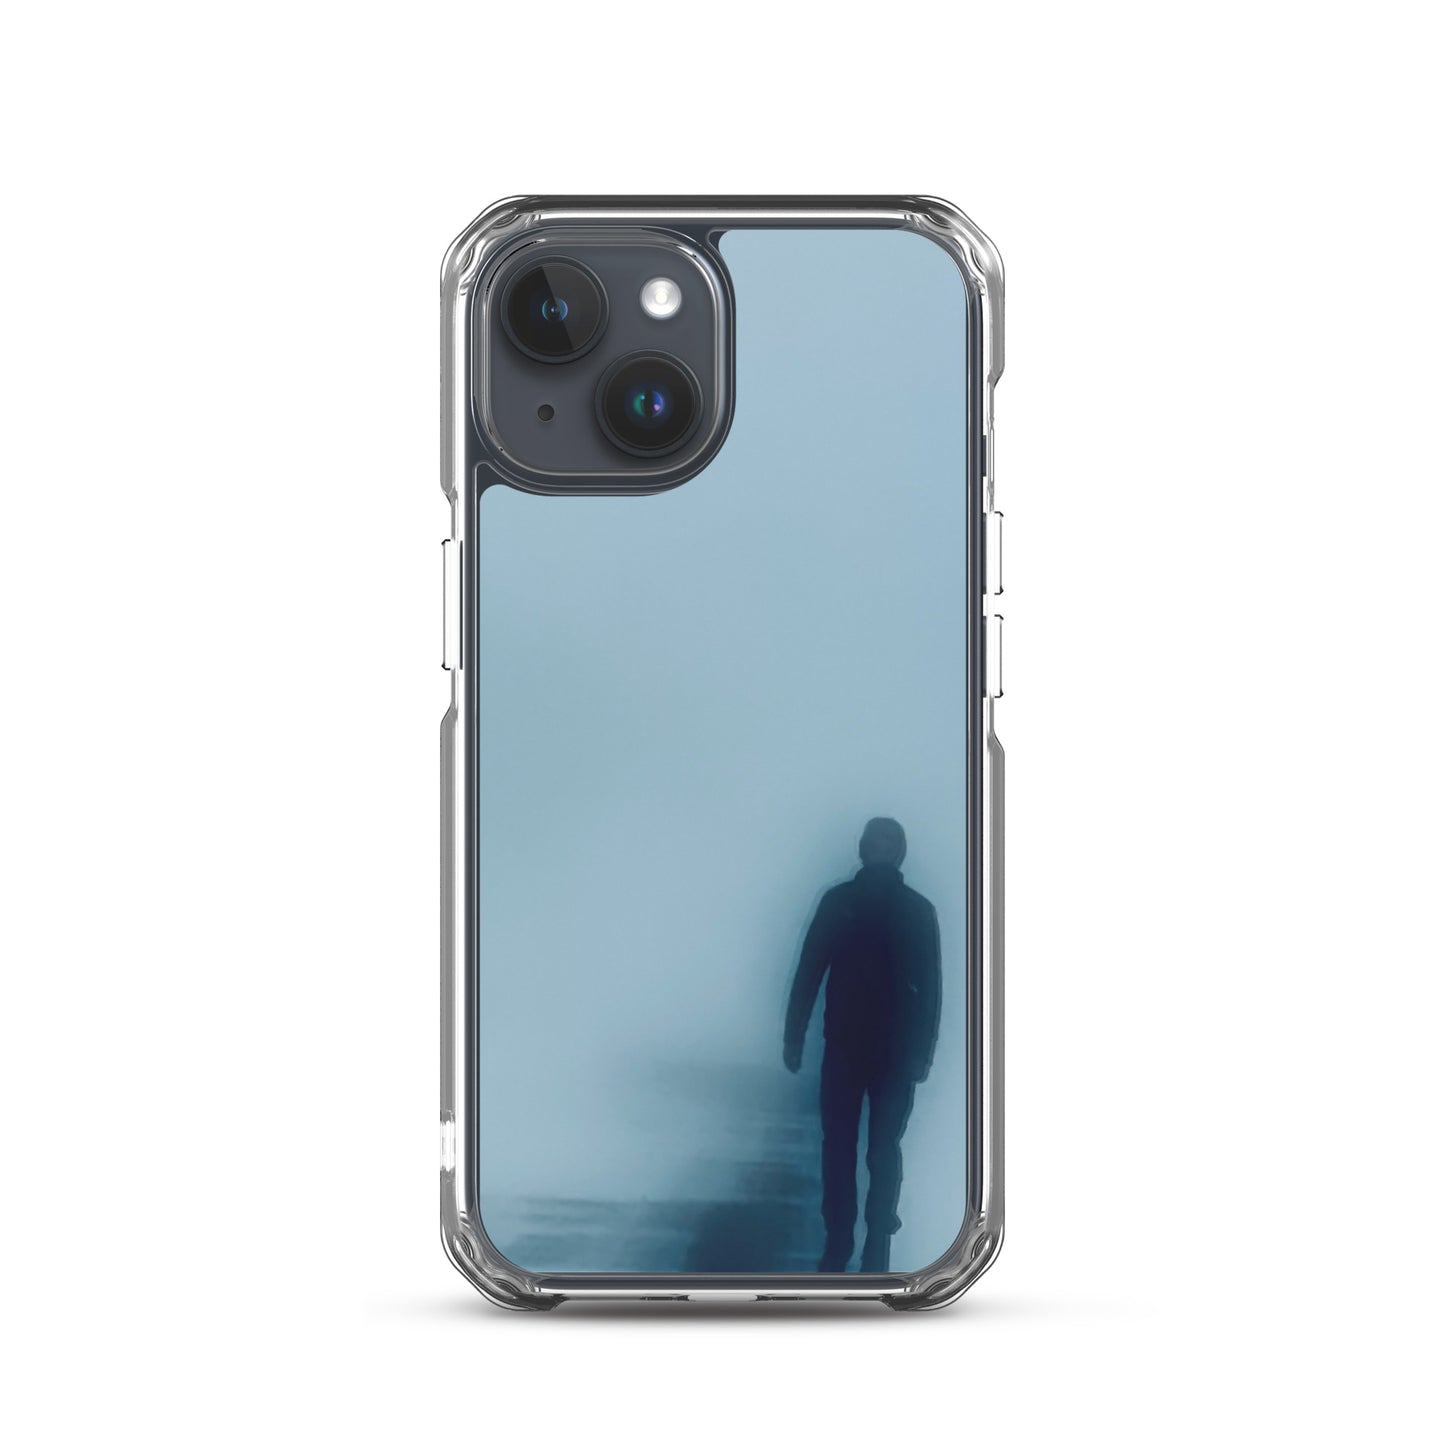 Into the fog (iPhone Case)